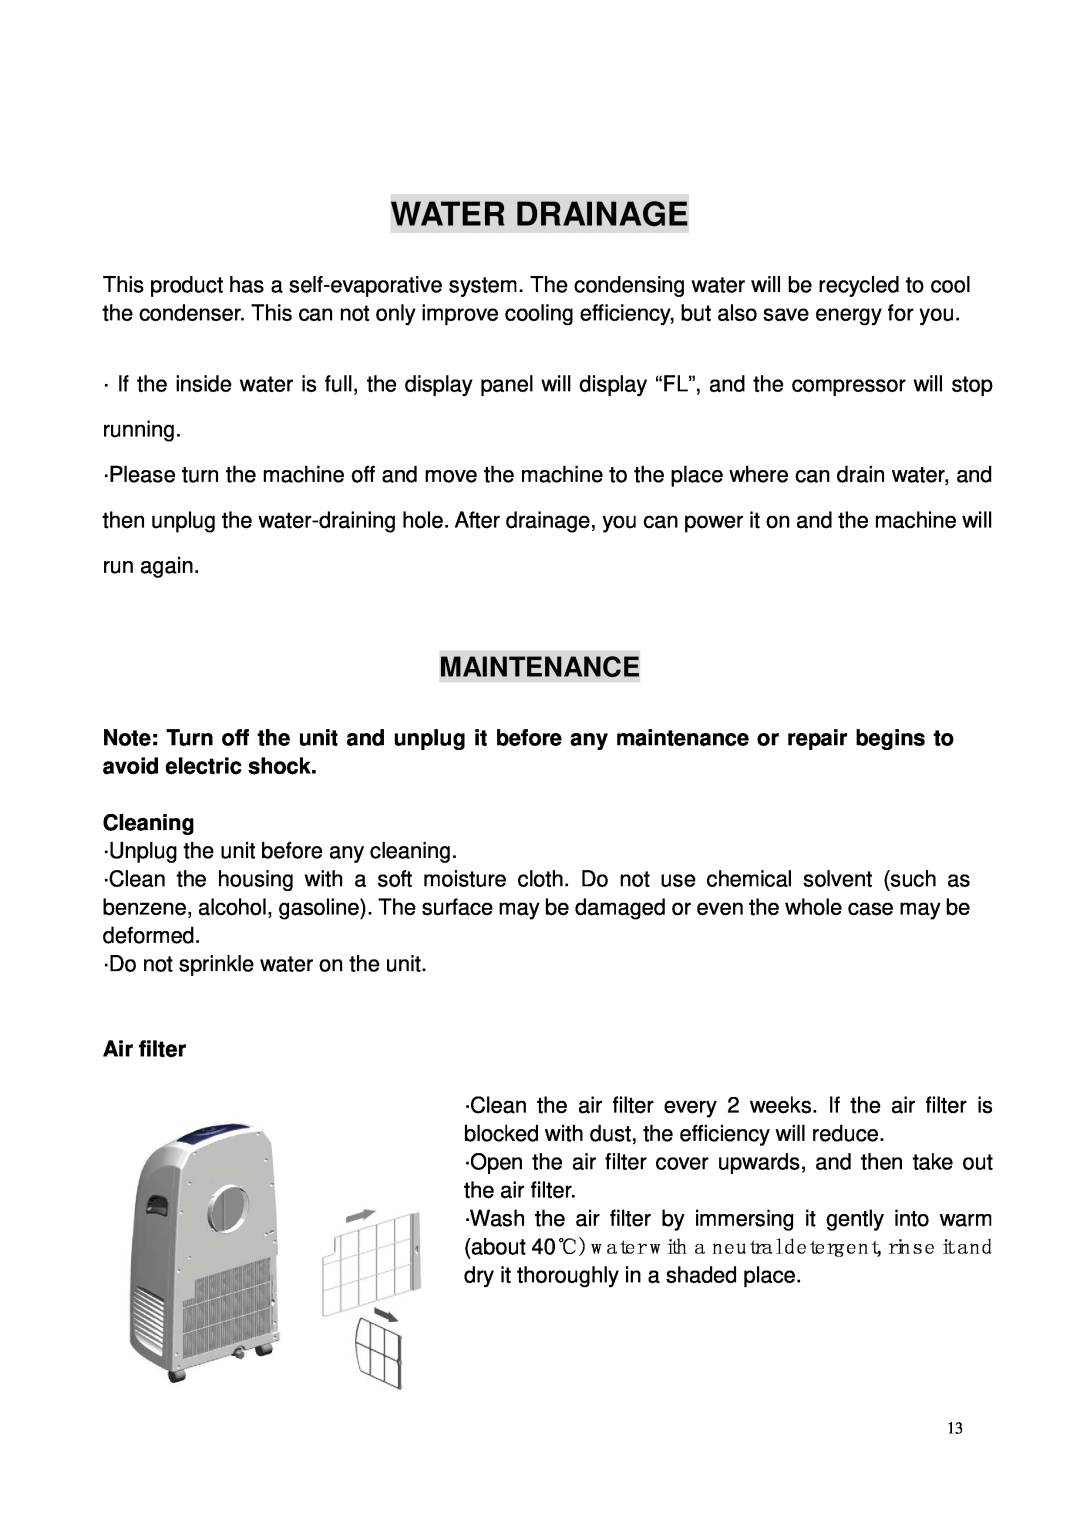 Brada Appliances YPL3-08C instruction manual Water Drainage, Maintenance, Cleaning, Air filter 